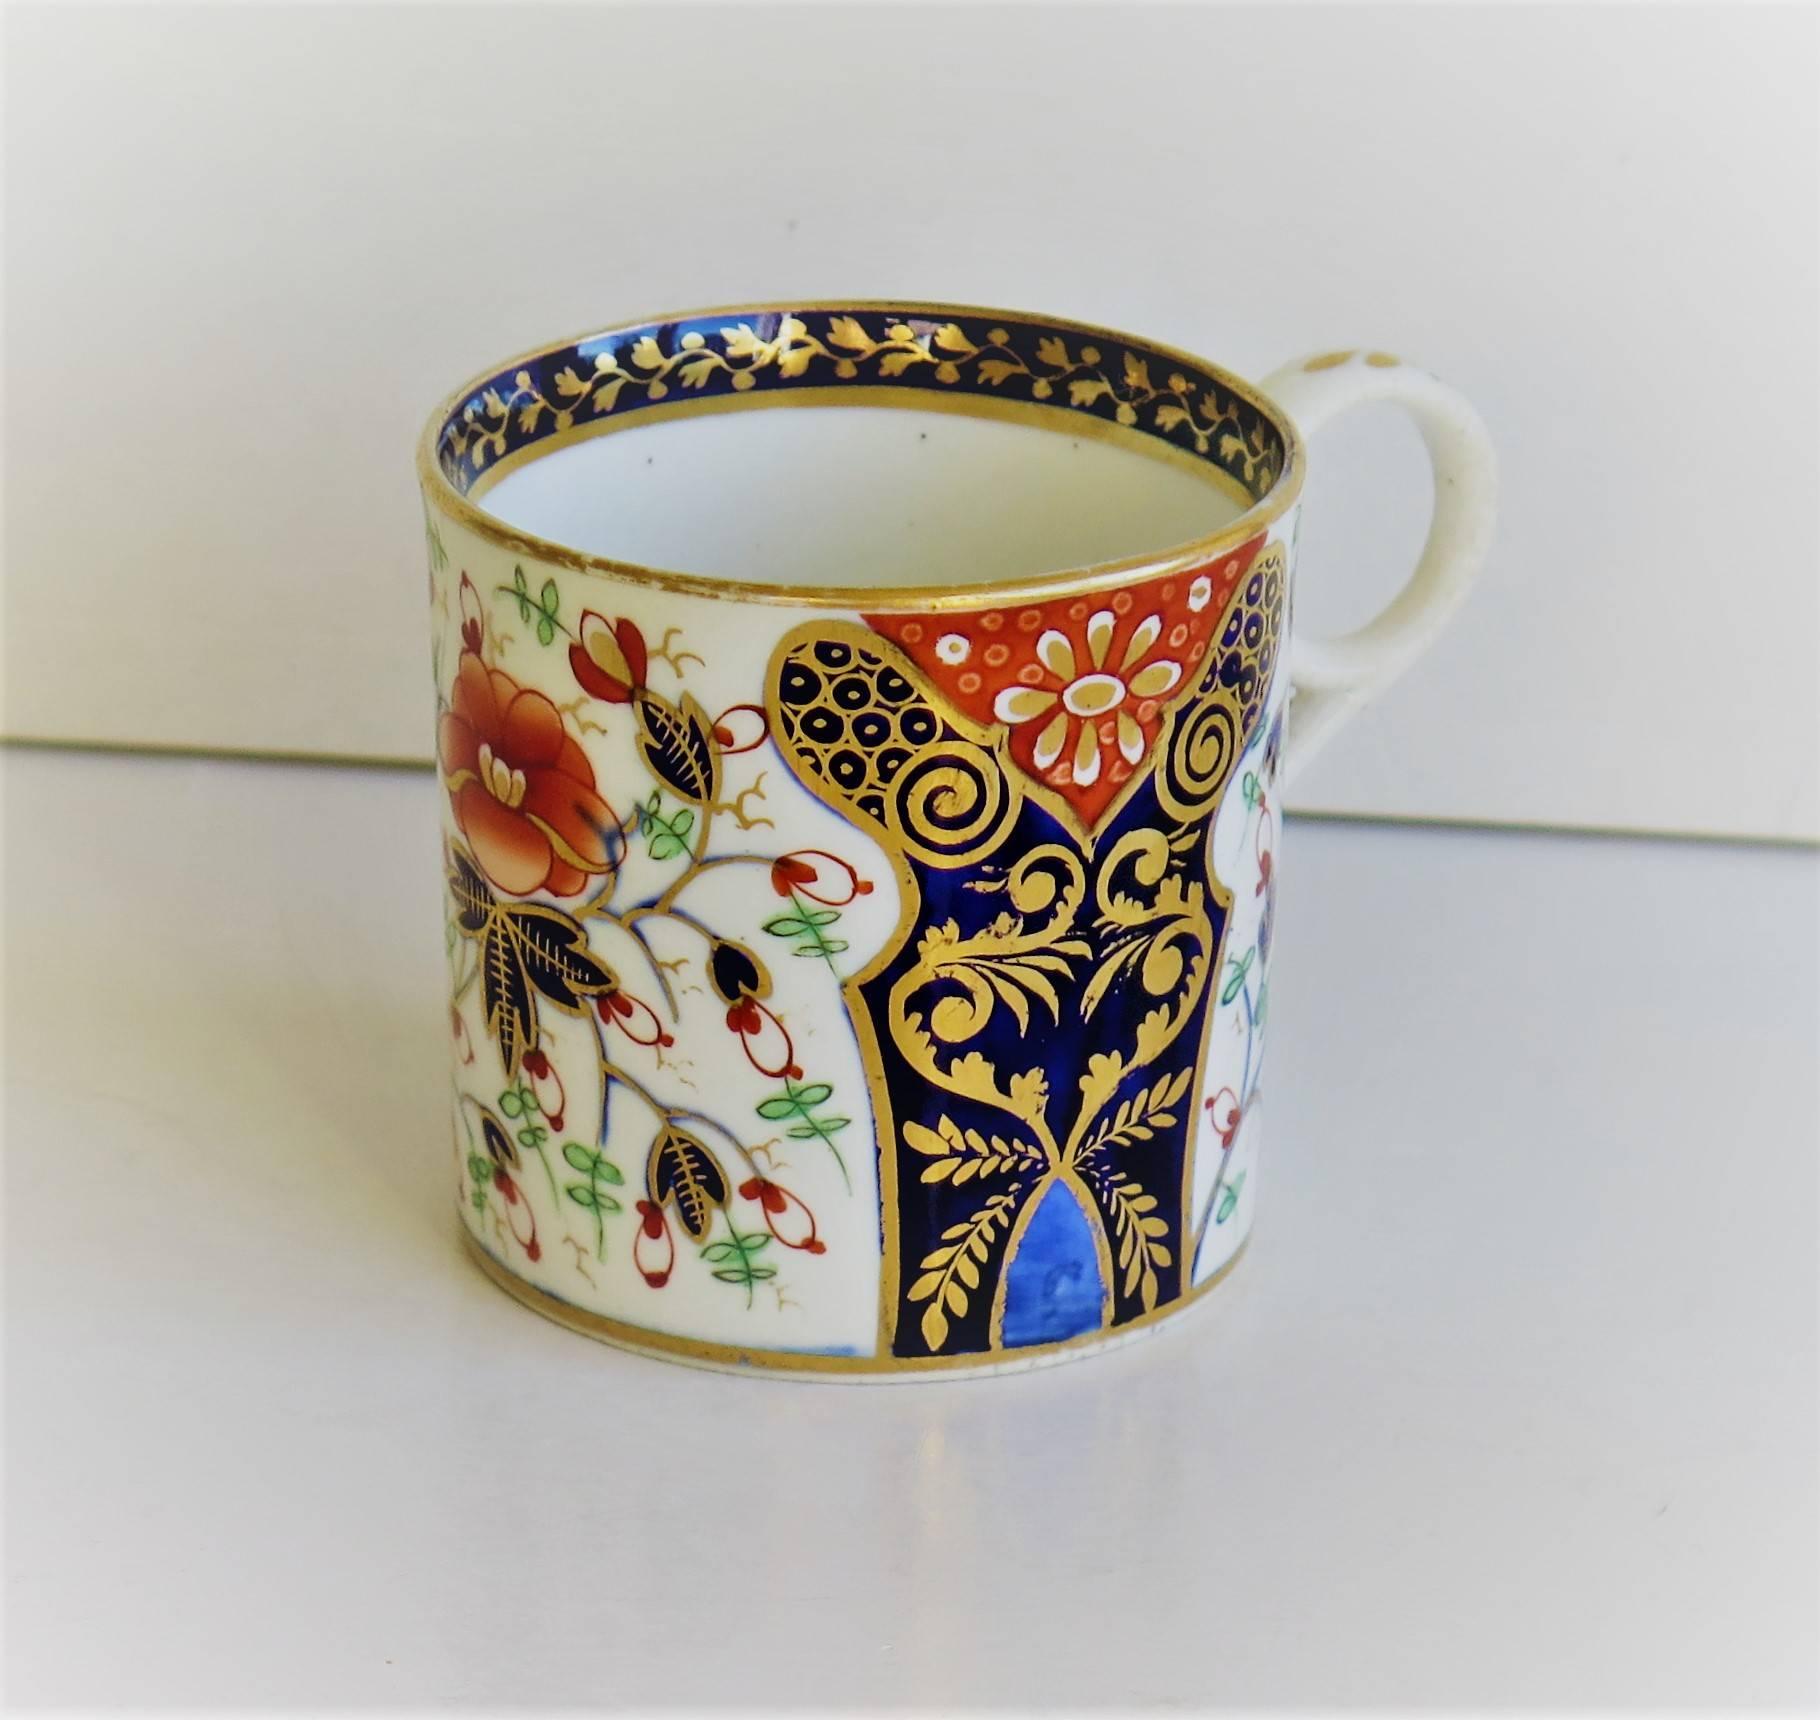 This is an exquisite, porcelain coffee can made by the Derby factory, in the reign of George 111 in the early 19th century, circa 1810.
 
Straight sided coffee cans were only made for about the first 20 years of the 19th century and are very